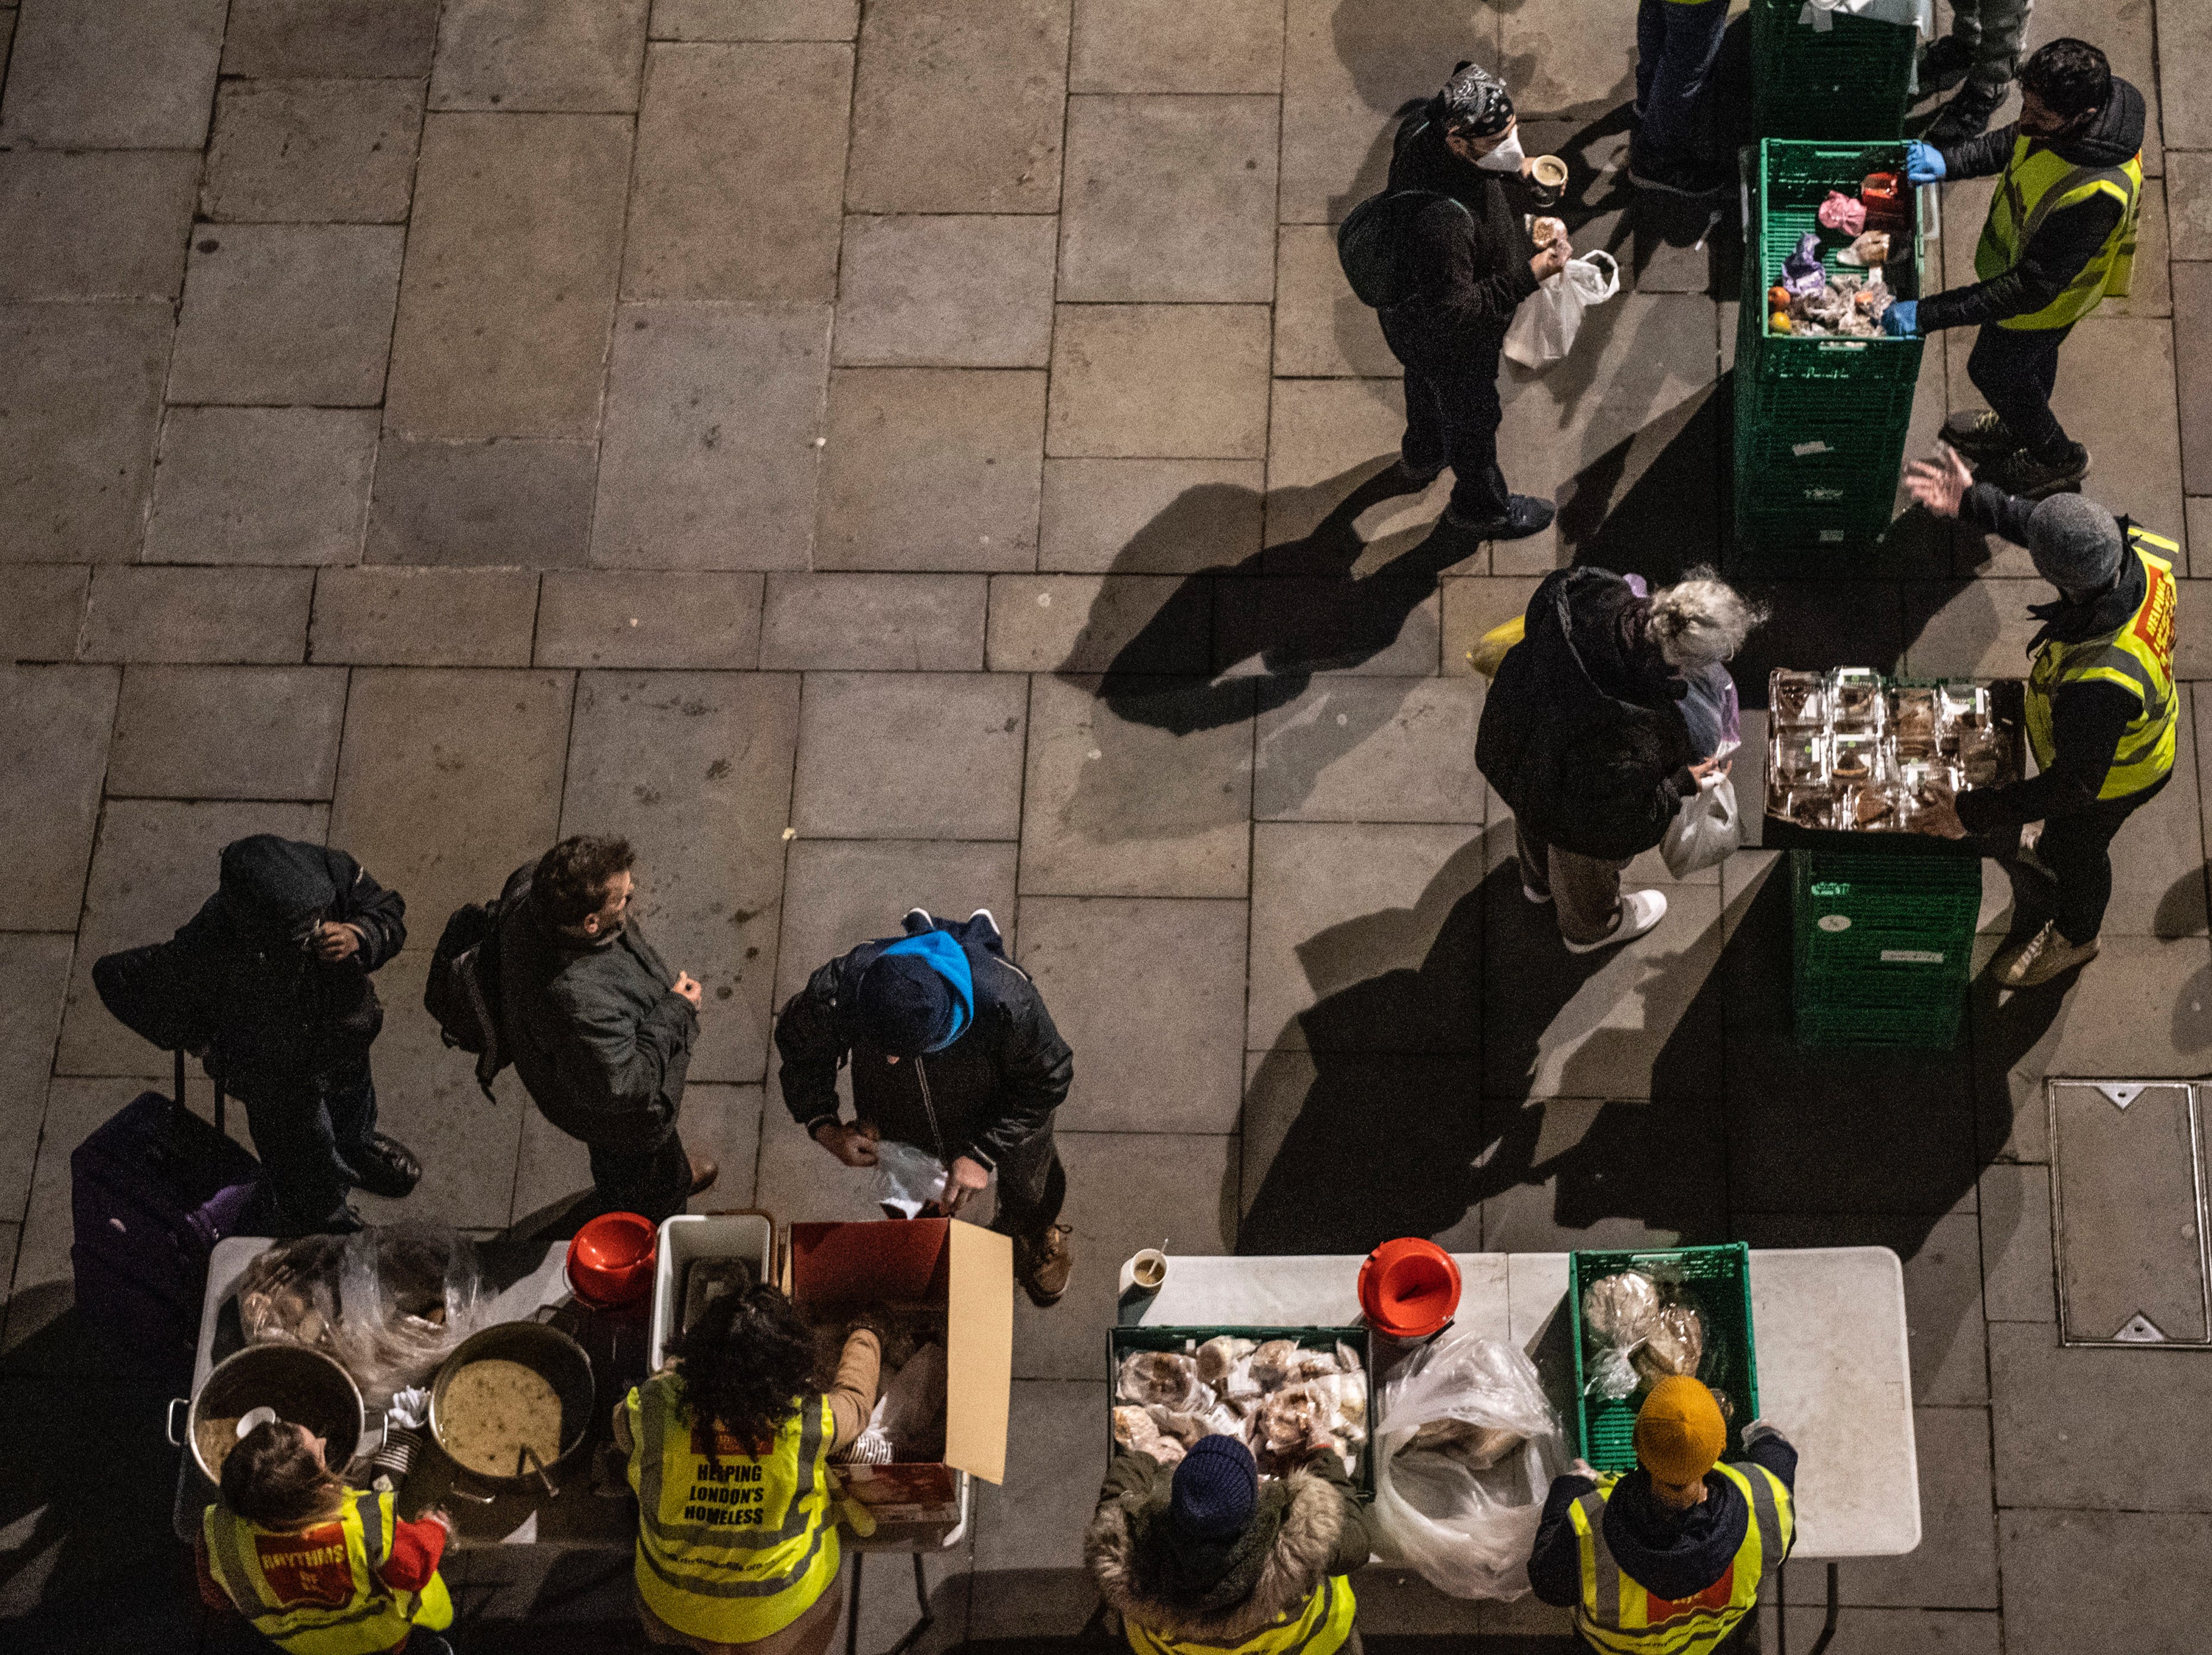 Homeless people collect donated food provided by charity, Rhythms of life near Trafalgar Square, London